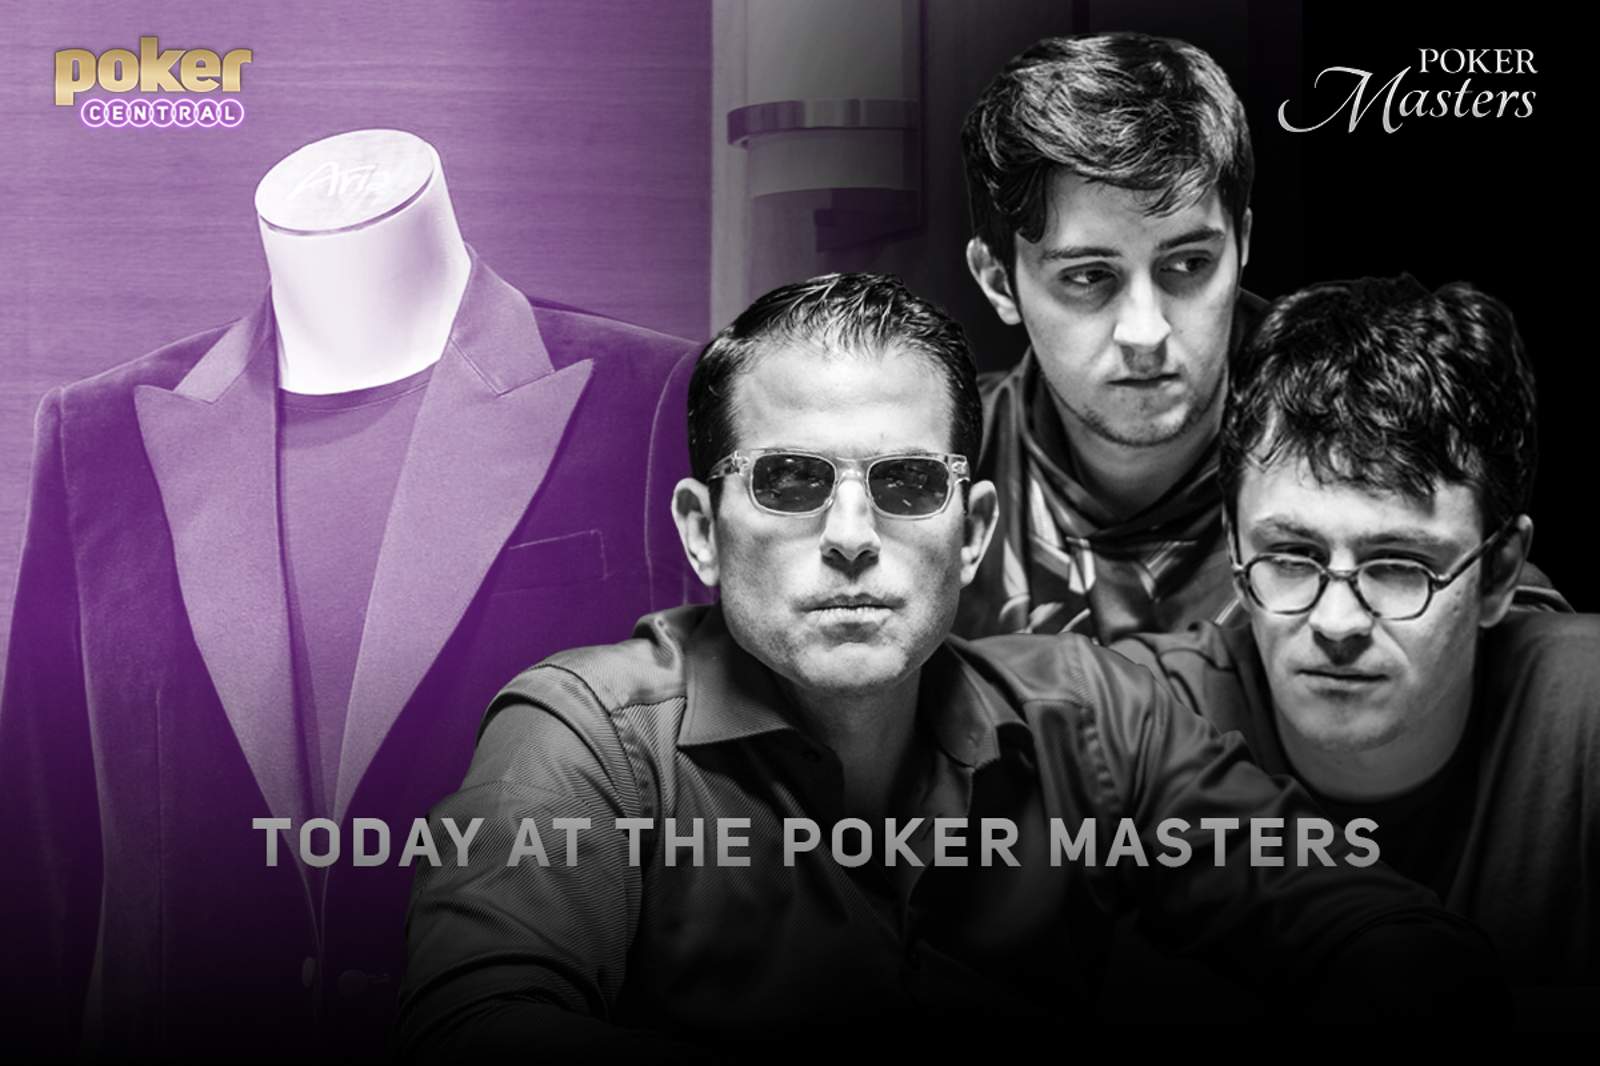 Today at the Poker Masters: Game of Thrones